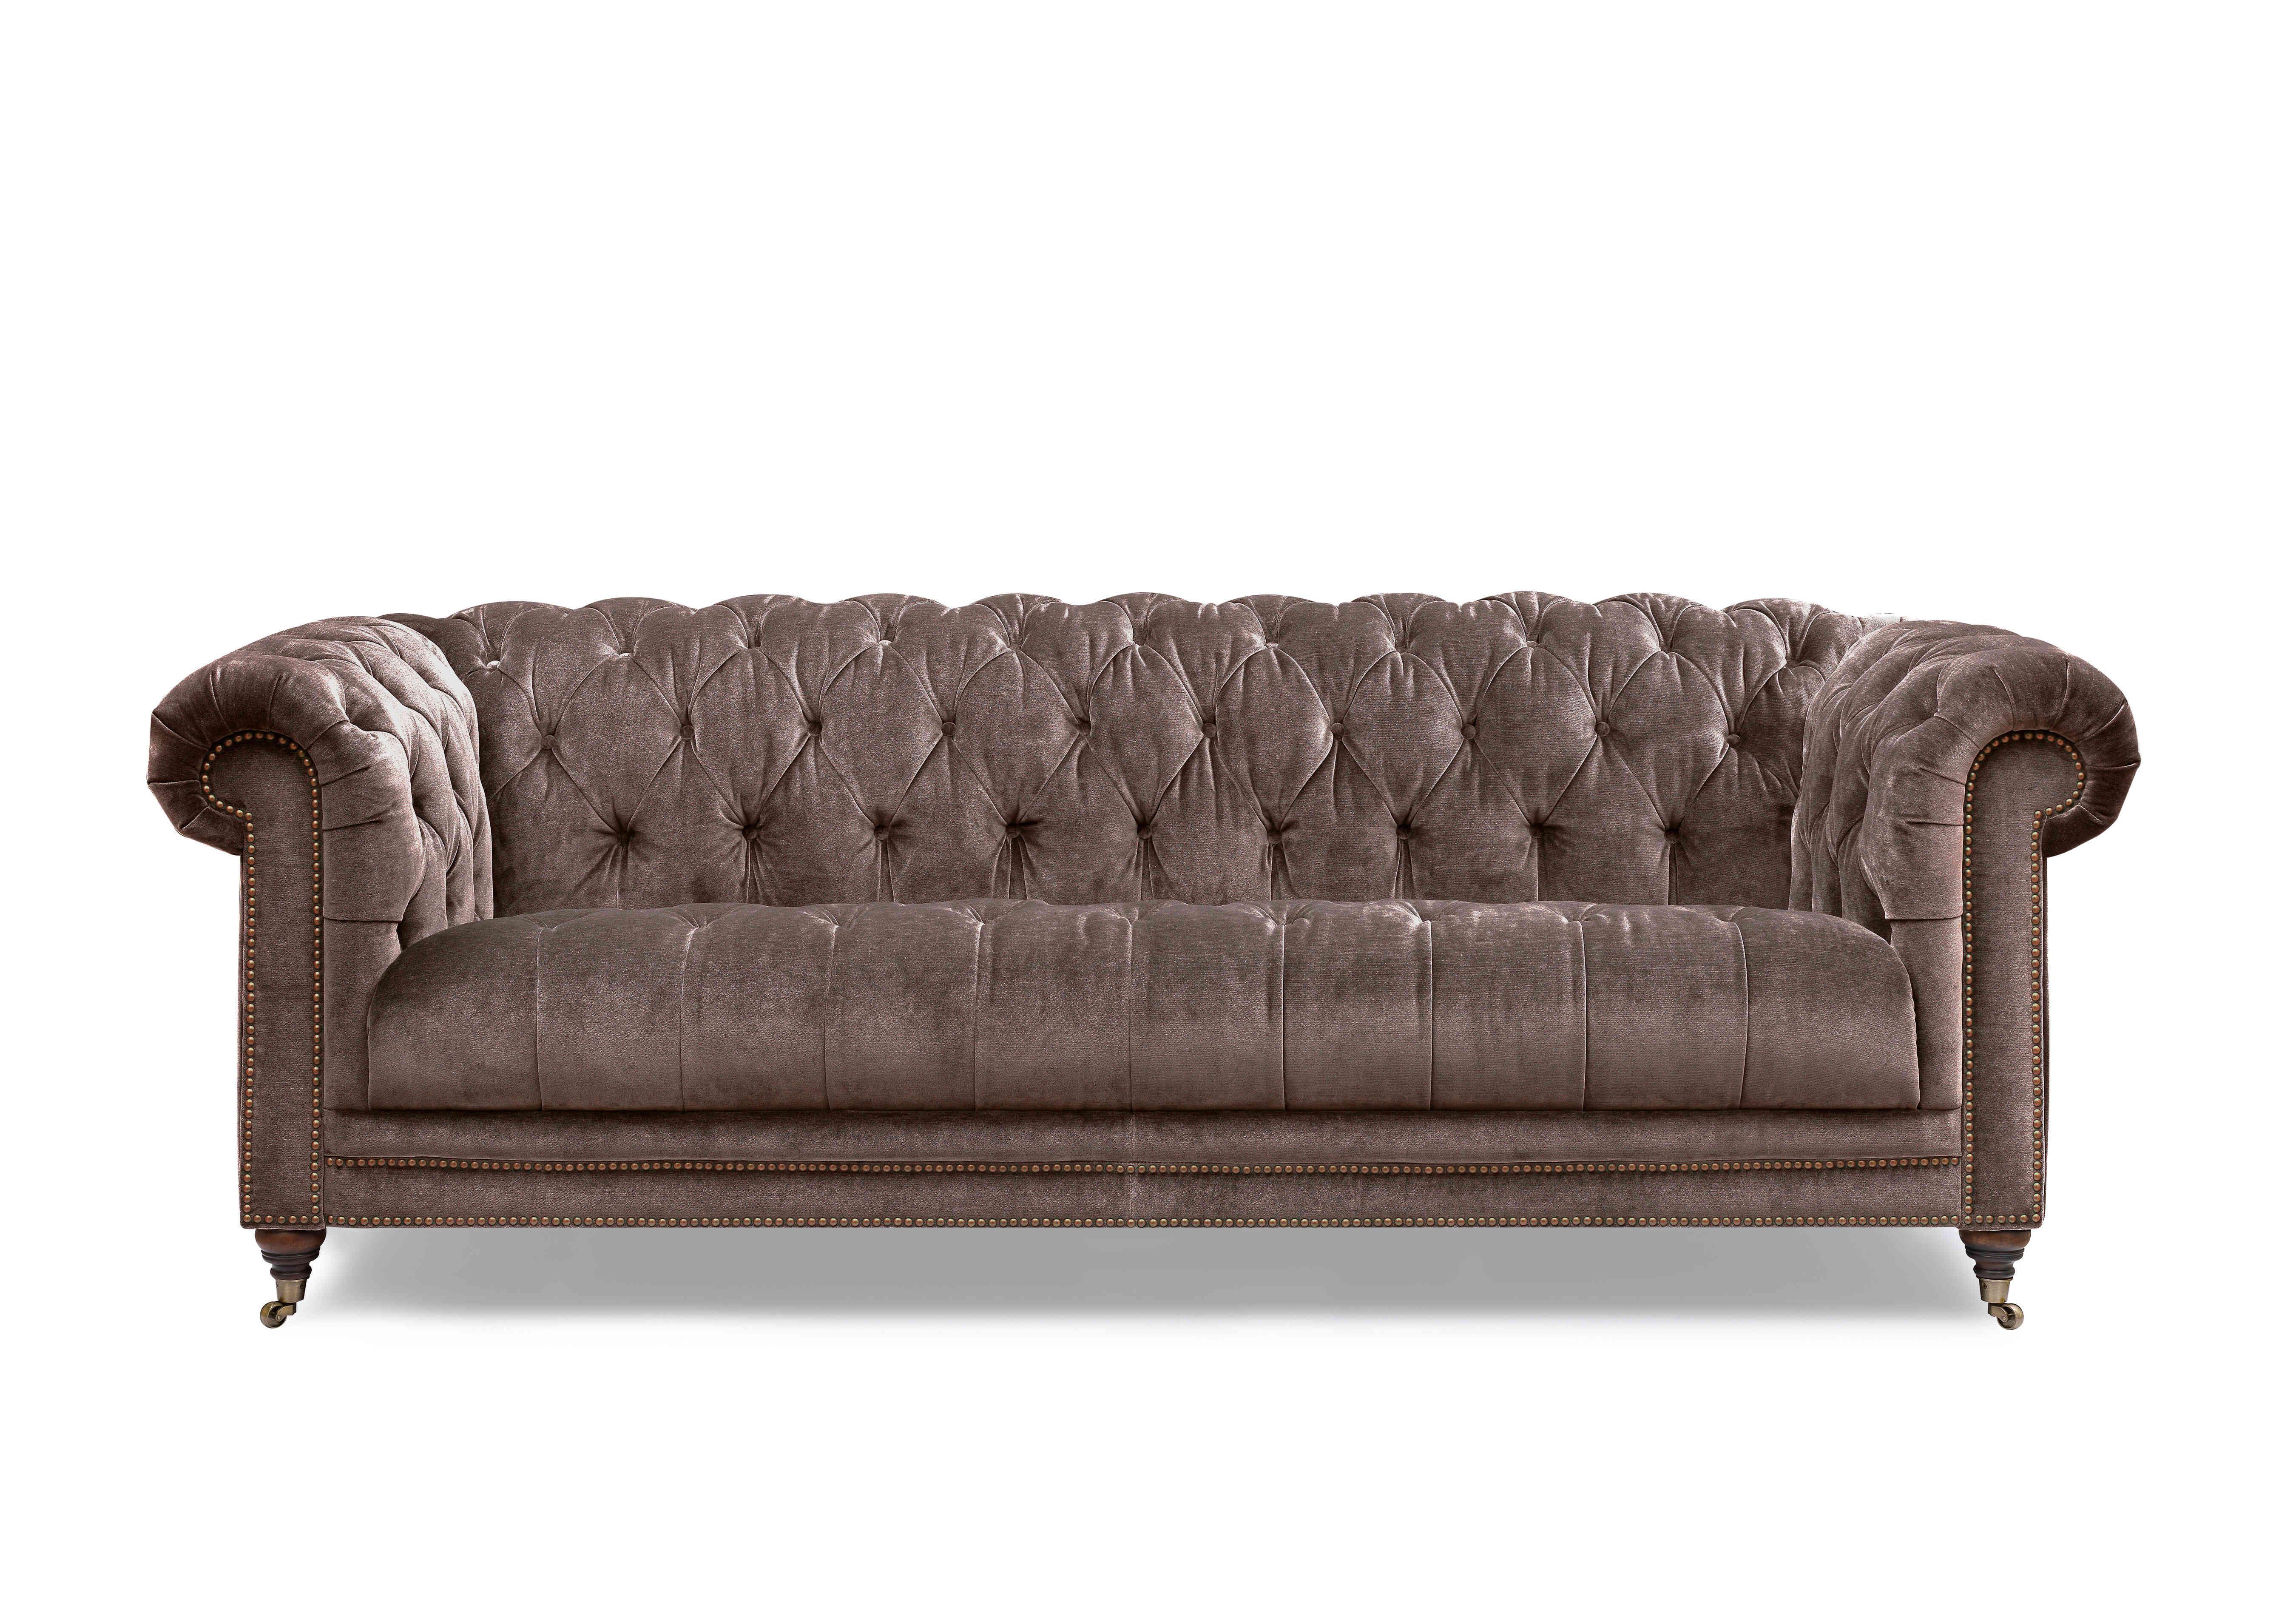 Walter 4 Seater Fabric Chesterfield Sofa with USB-C in X3y1-W023 Antler on Furniture Village